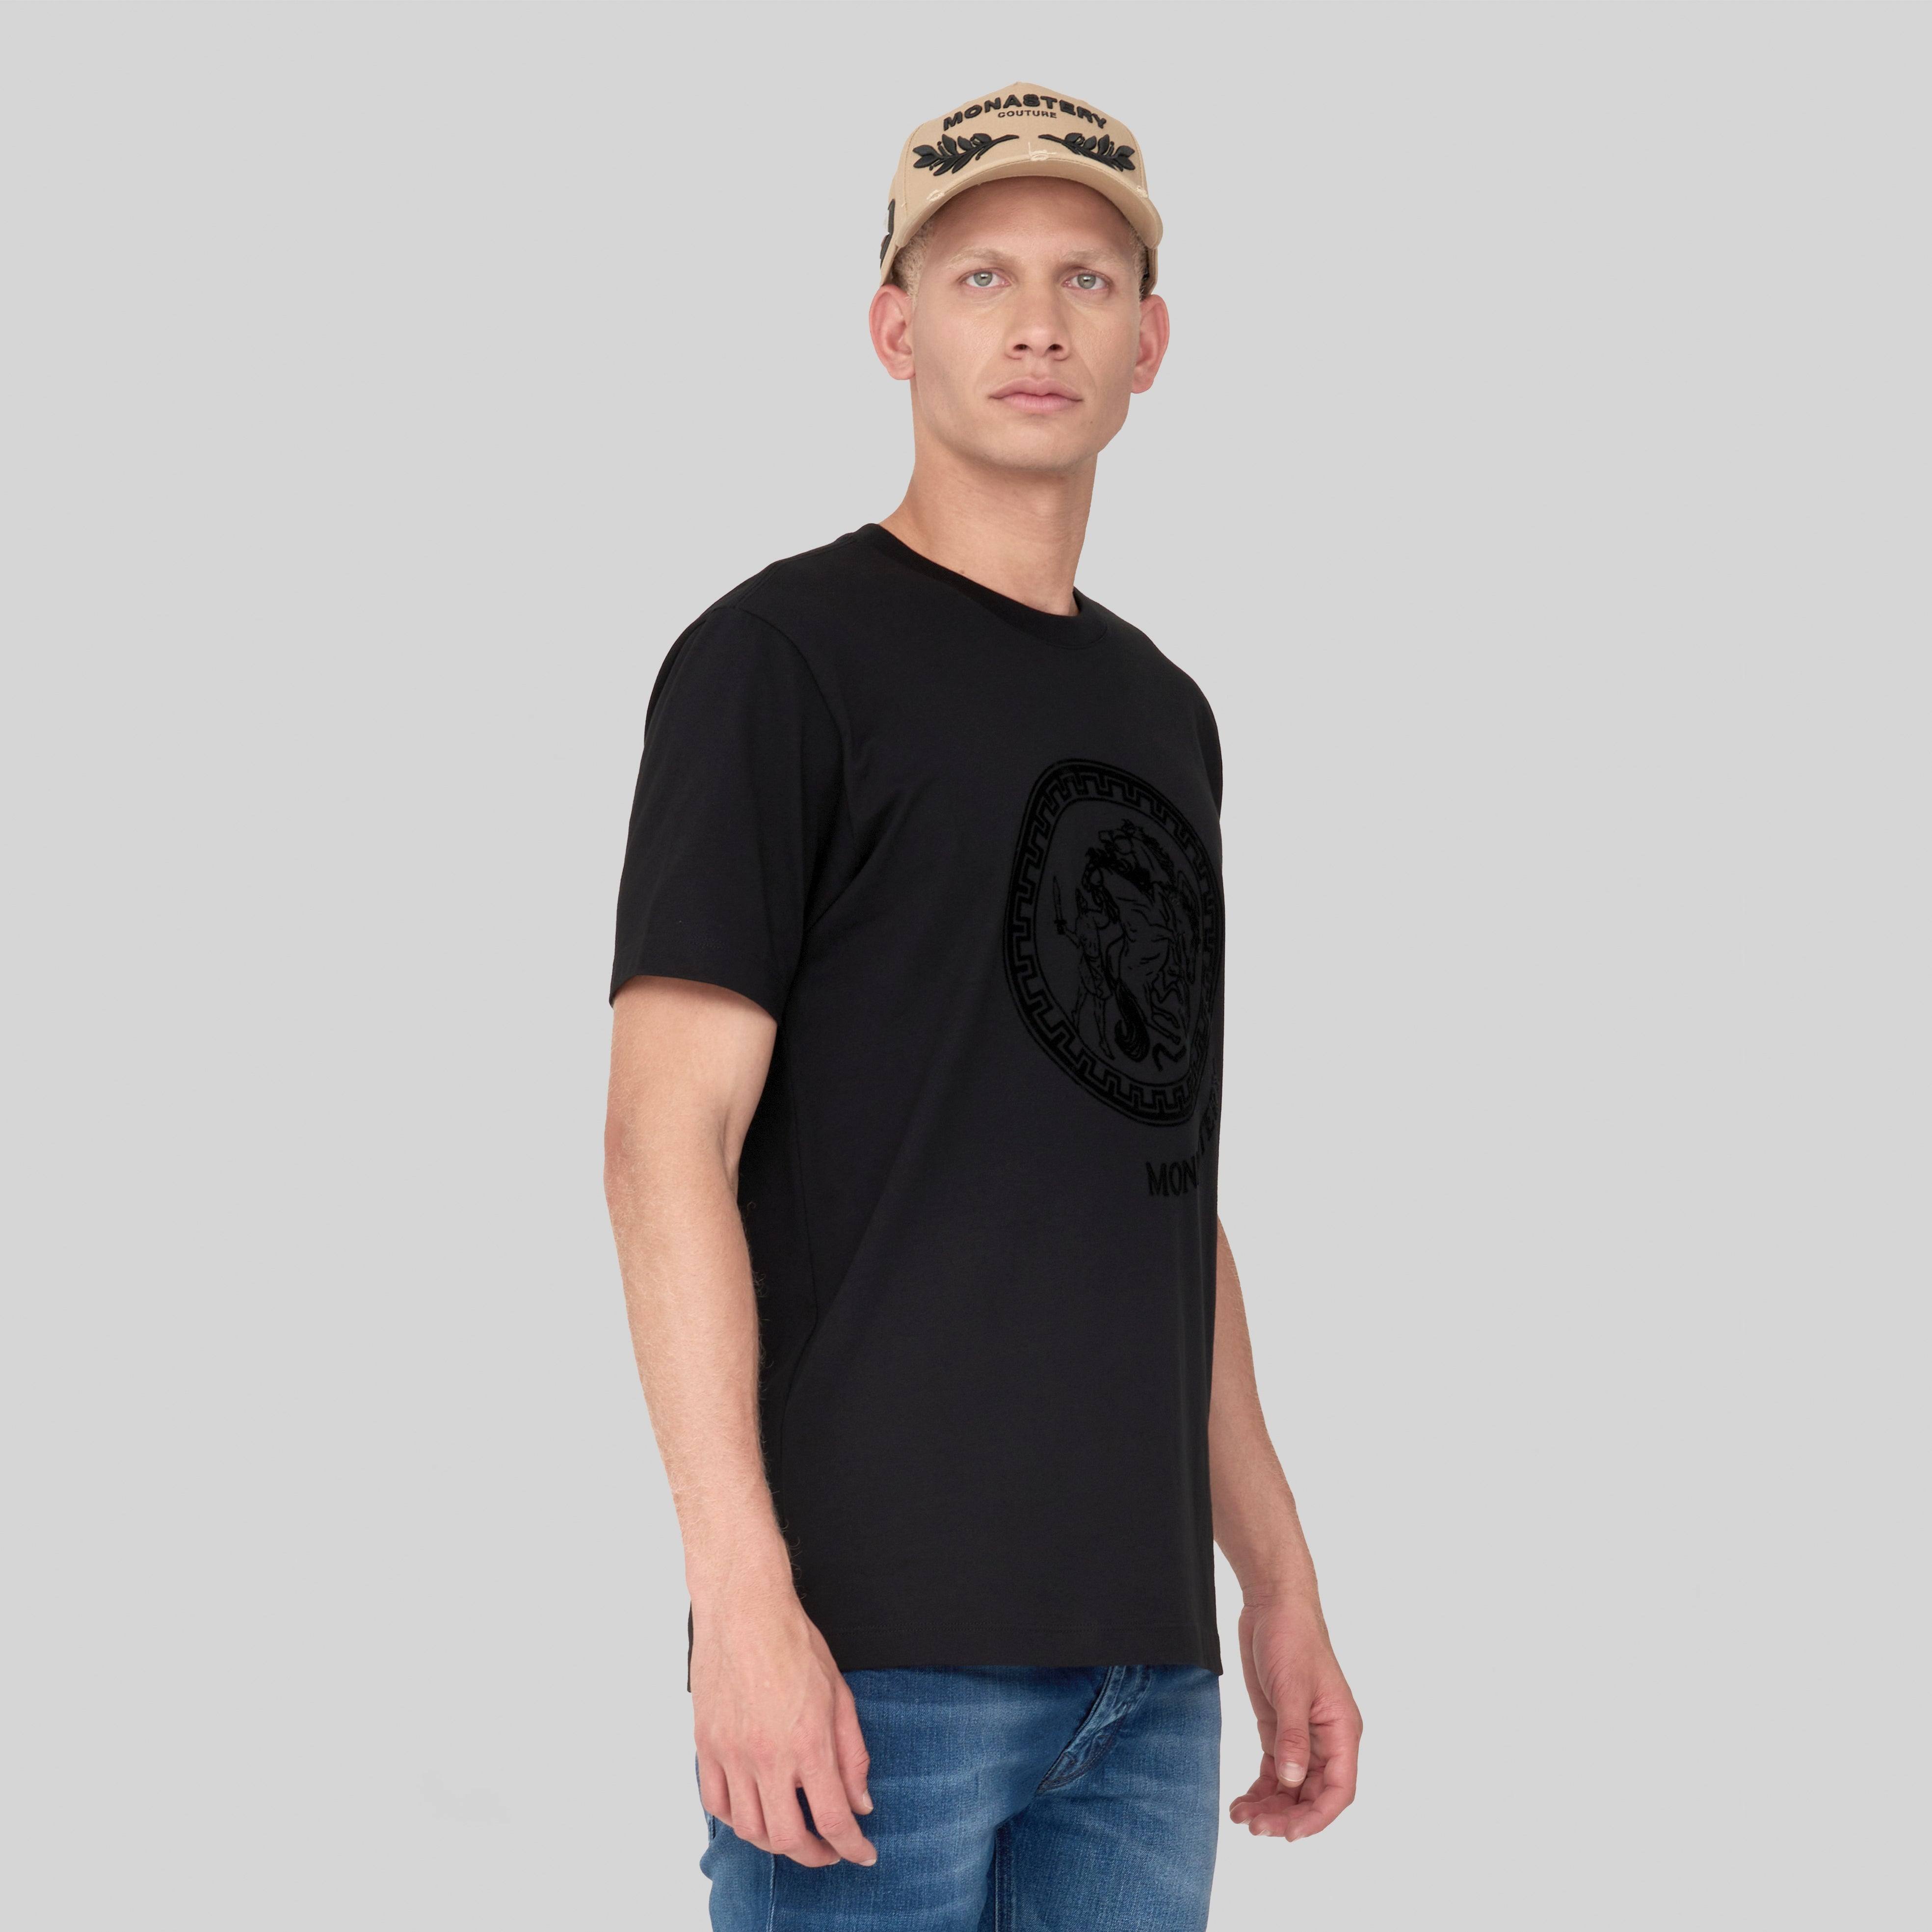 OLINTO BLACK T-SHIRT | Monastery Couture